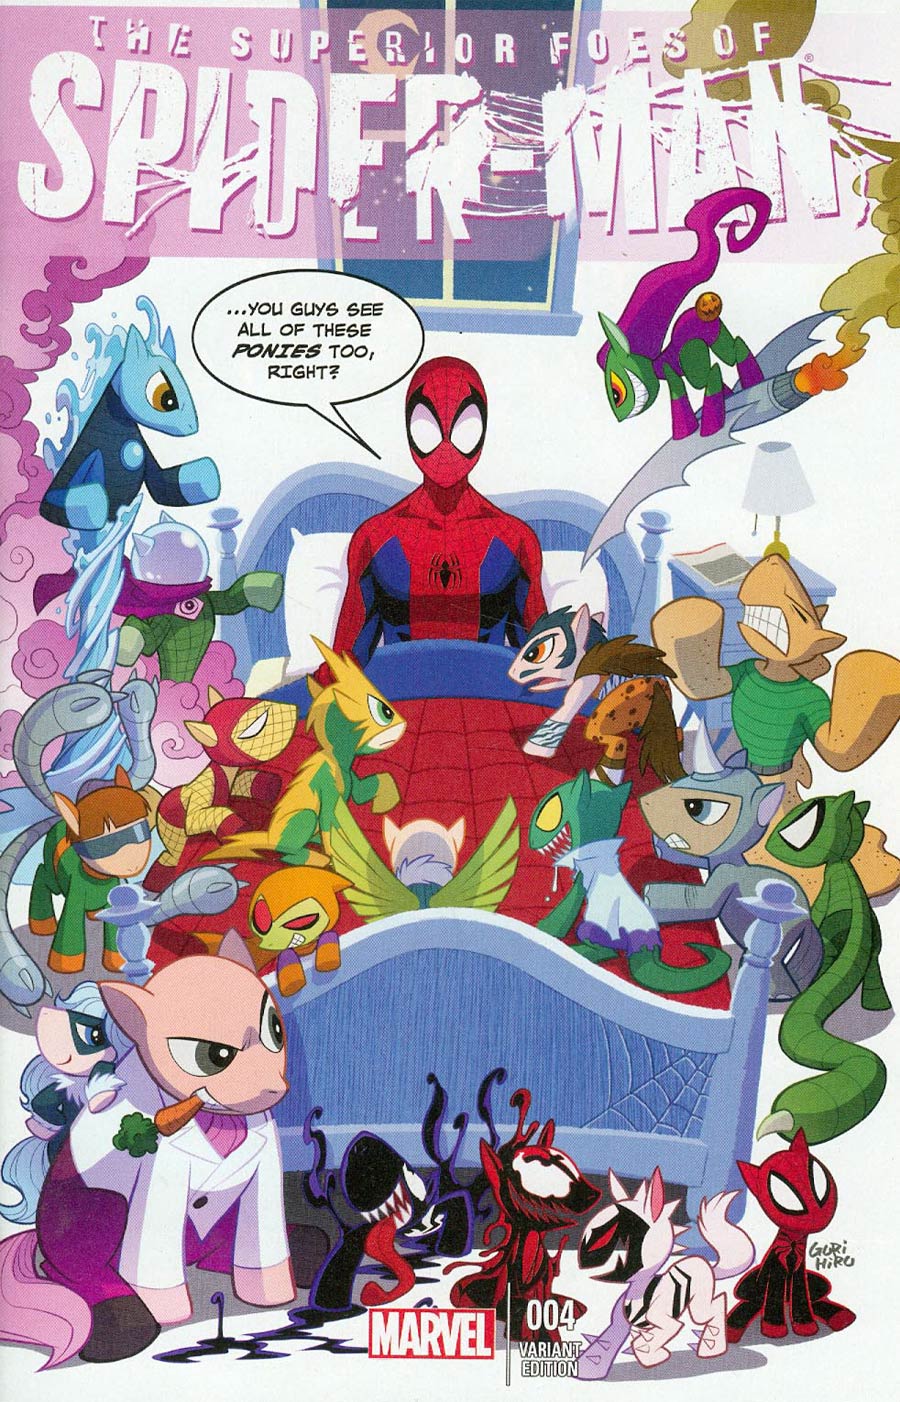 Superior Foes Of Spider-Man #4 Cover C 2013 NYCC Exclusive Gurihiru Variant Cover